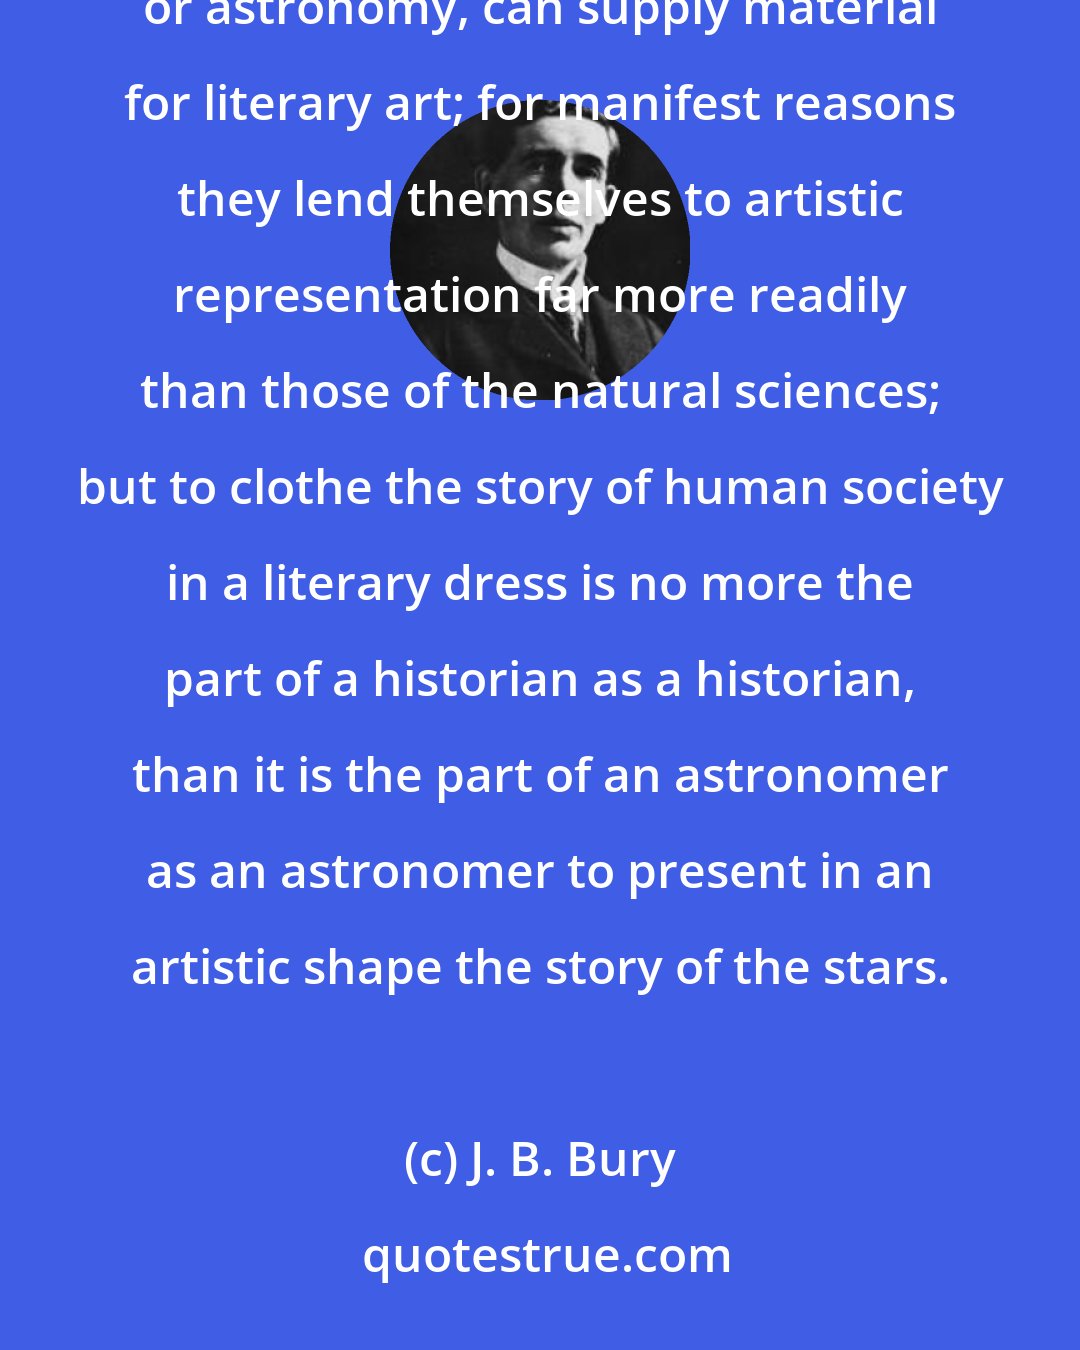 J. B. Bury: I may remind you that history is not a branch of literature. The facts of history, like the facts of geology or astronomy, can supply material for literary art; for manifest reasons they lend themselves to artistic representation far more readily than those of the natural sciences; but to clothe the story of human society in a literary dress is no more the part of a historian as a historian, than it is the part of an astronomer as an astronomer to present in an artistic shape the story of the stars.